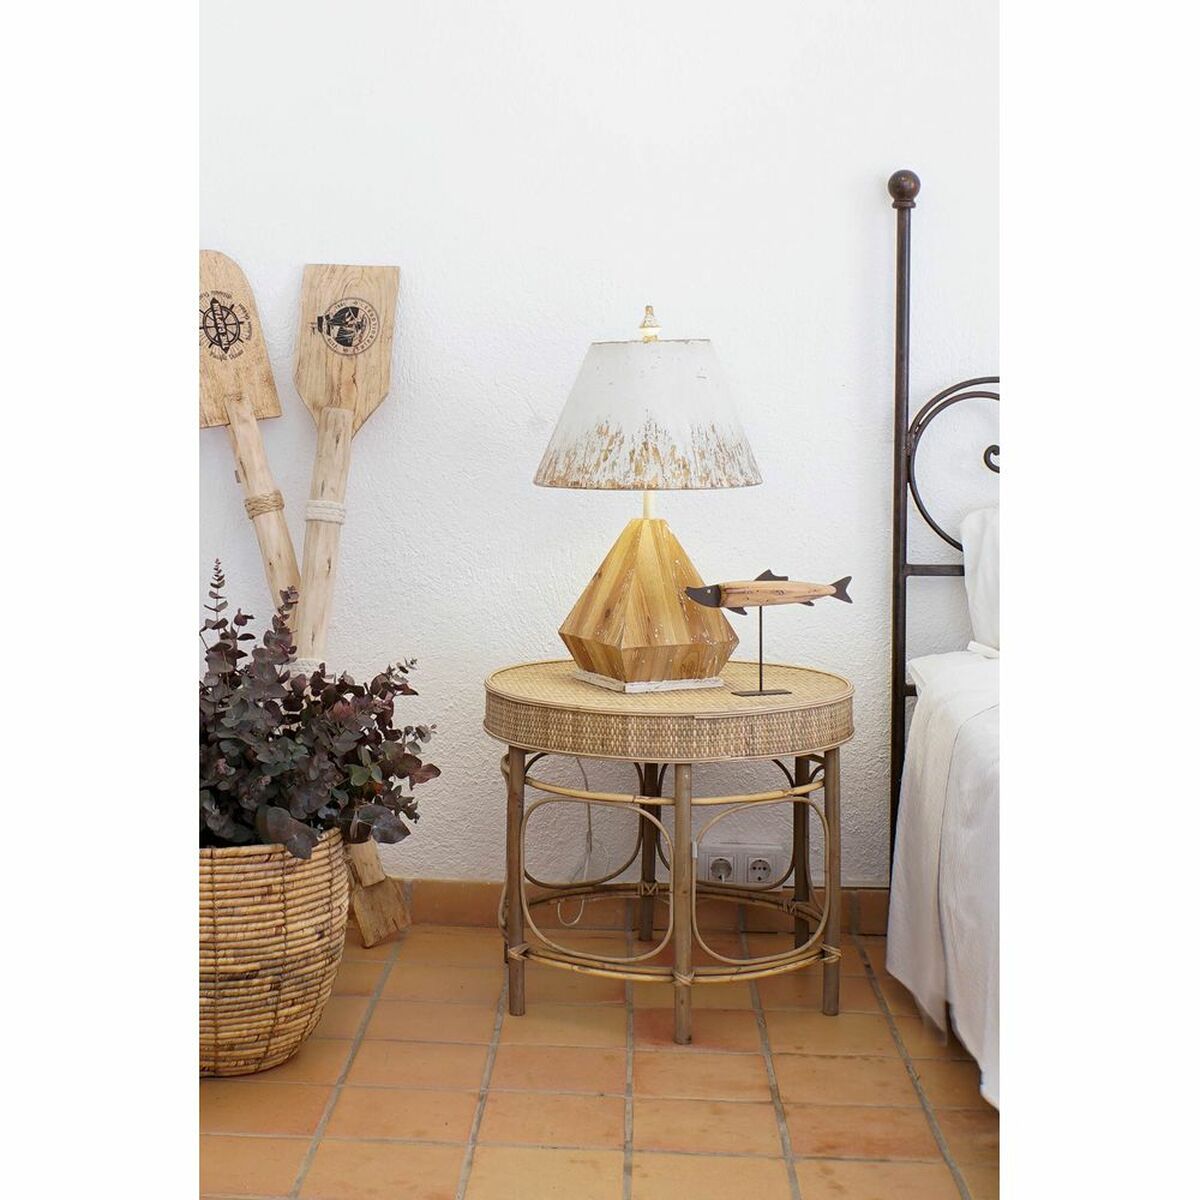 Set of 2 Round Side tables in Rattan (61 x 61 x 52 cm)